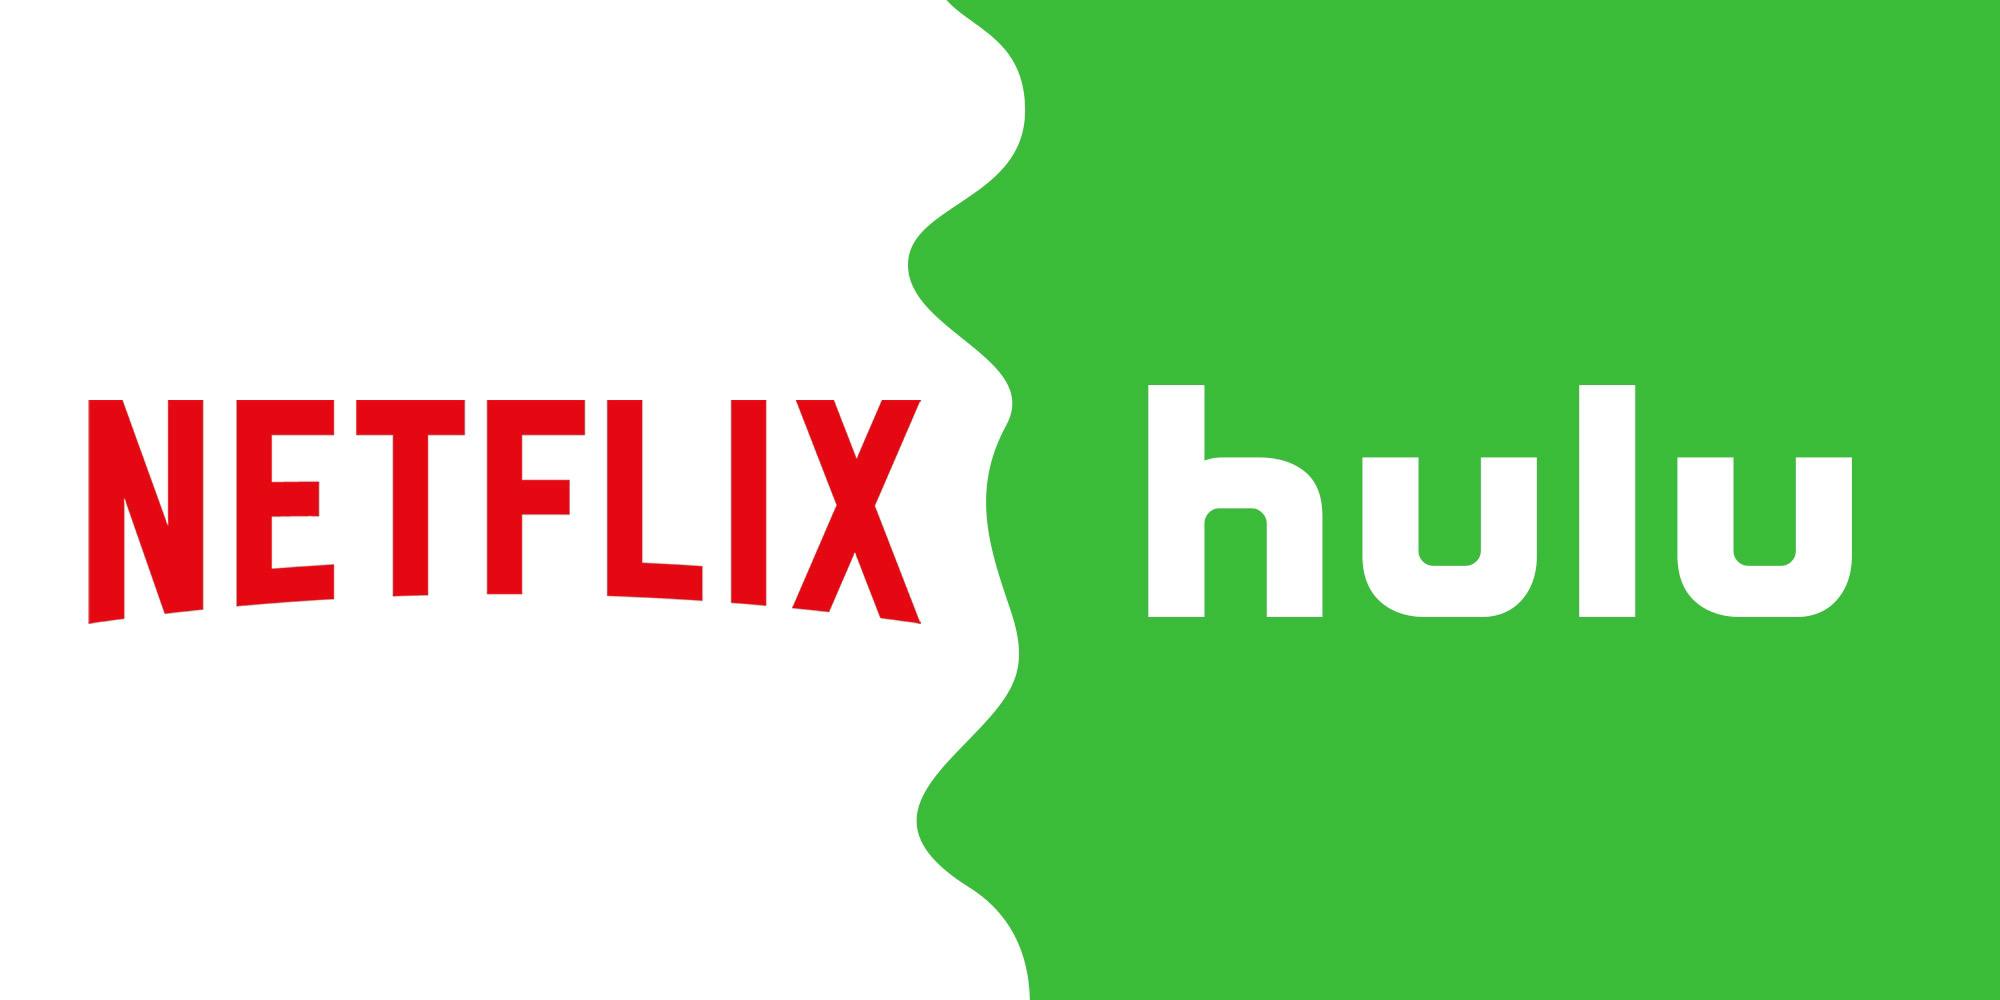 logos for netflix (left) and hulu (right)